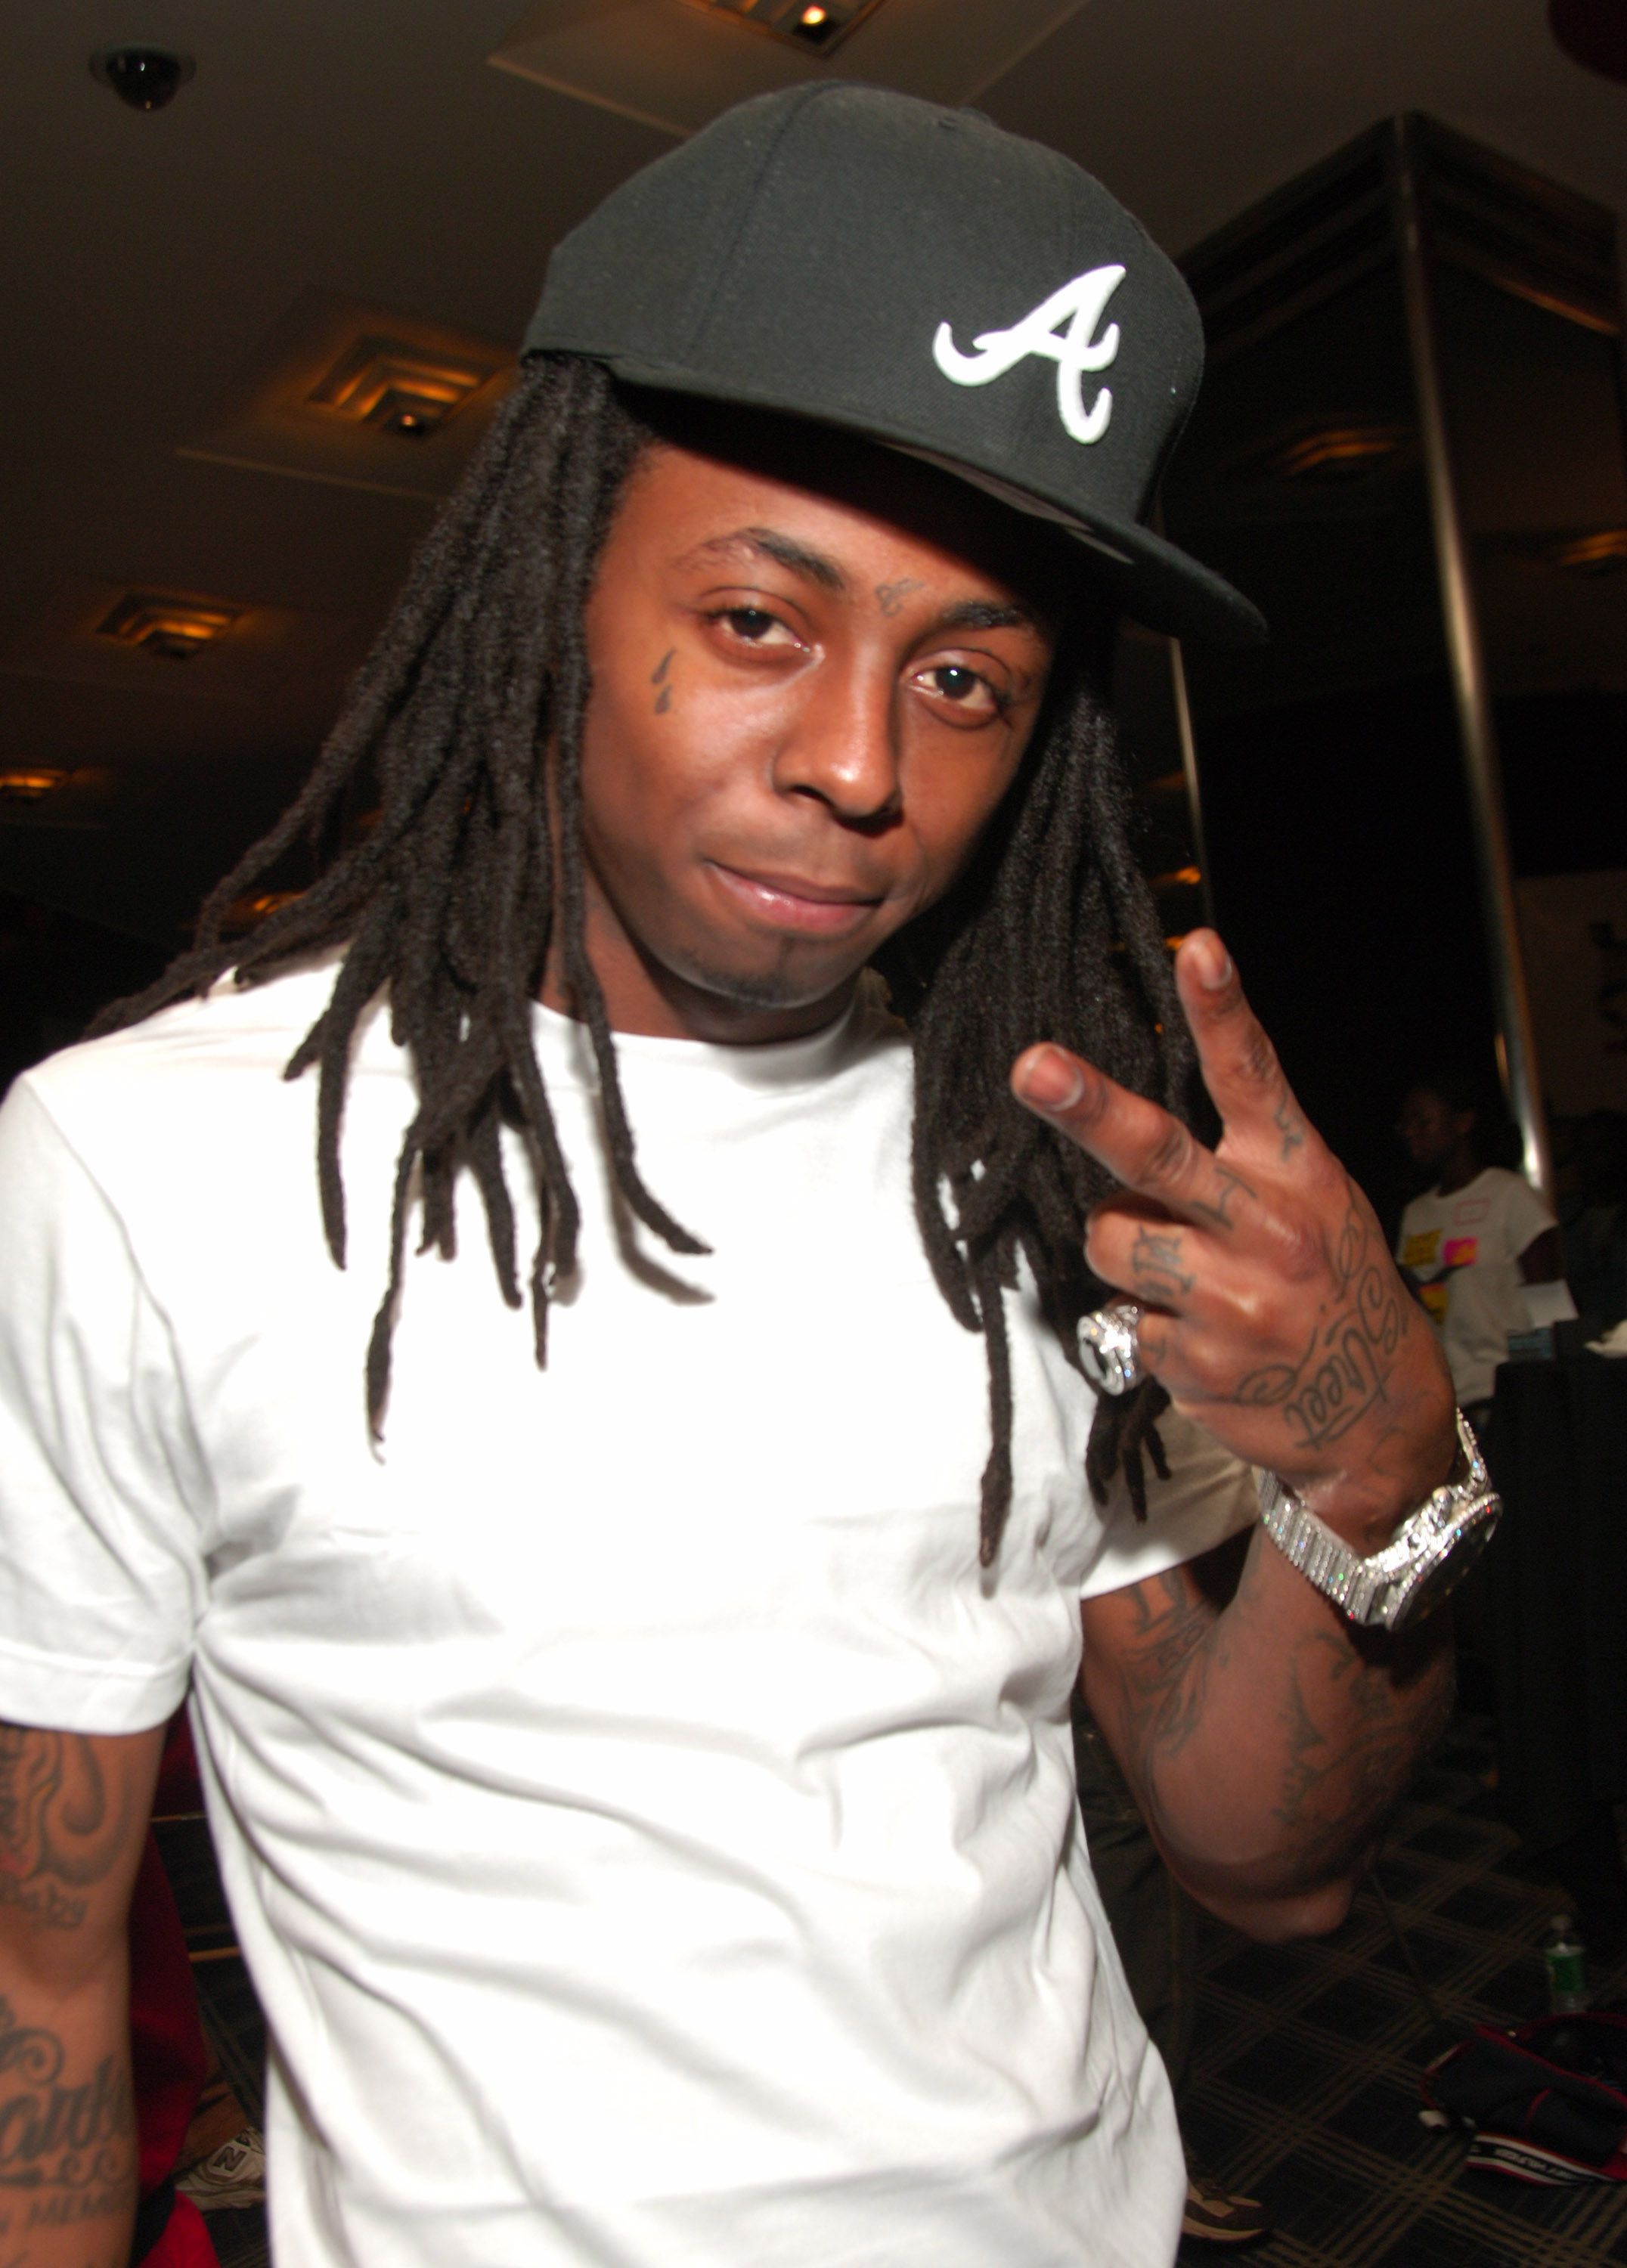 Lil Wayne at an MTV event in 2006